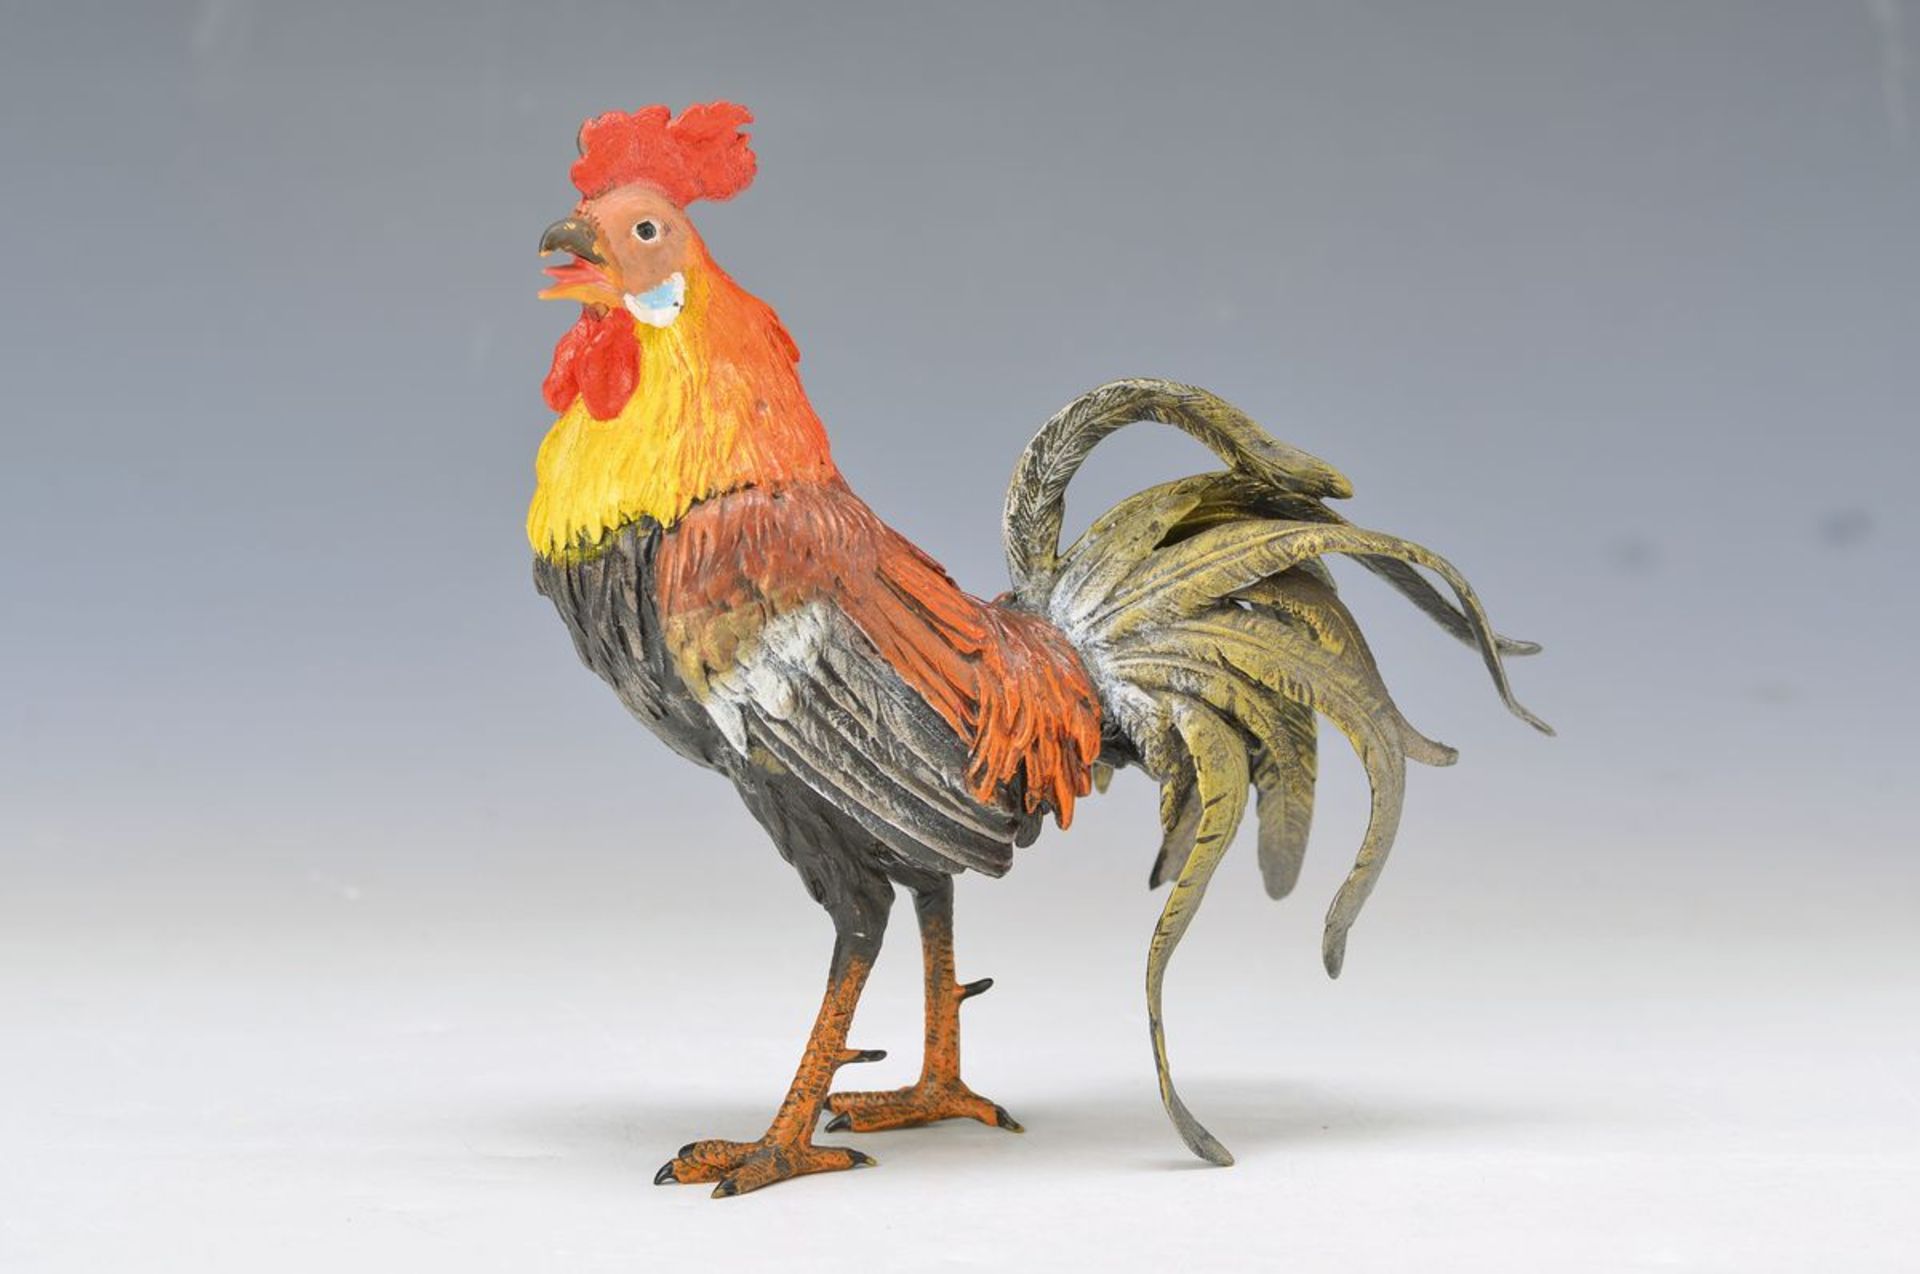 Large Vienna Bronze, pacing cock, naturalisticrepresentation, H.approx. 18.5 cm, multi- colored